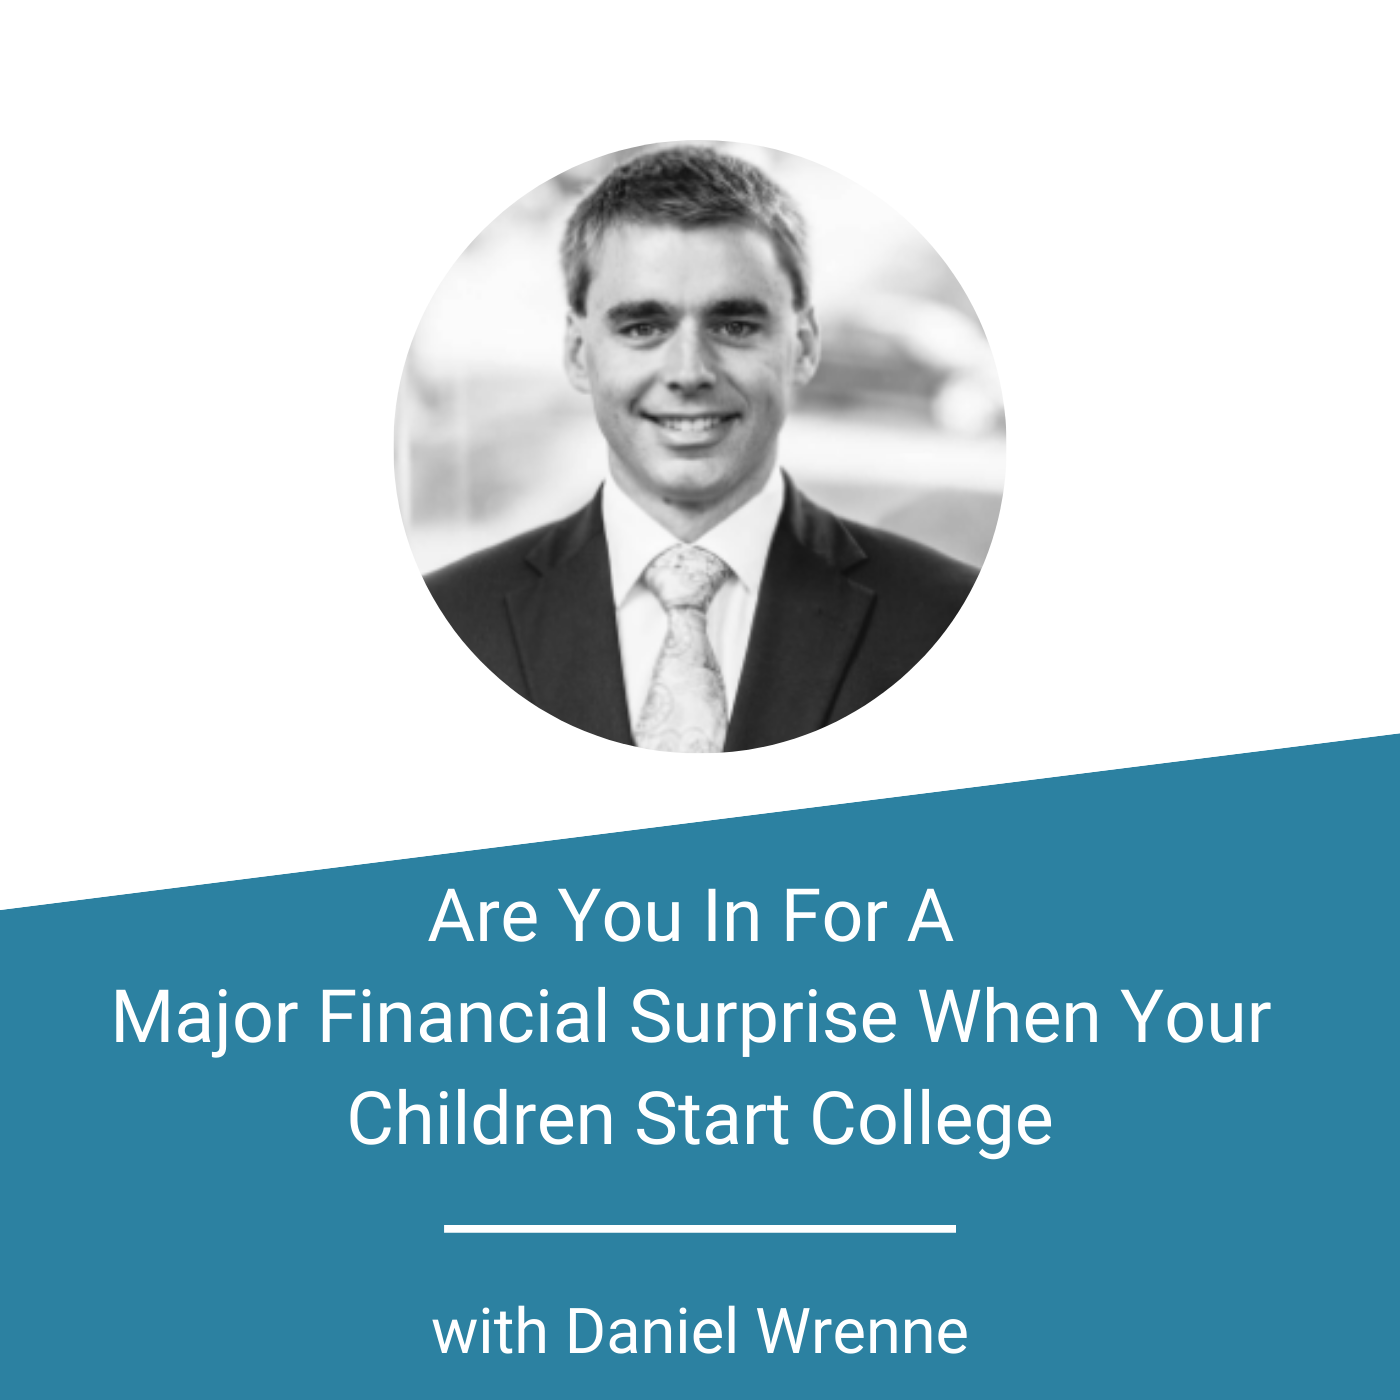 Featured Image - Are You In For A Major Financial Surprise When Your Children Start College